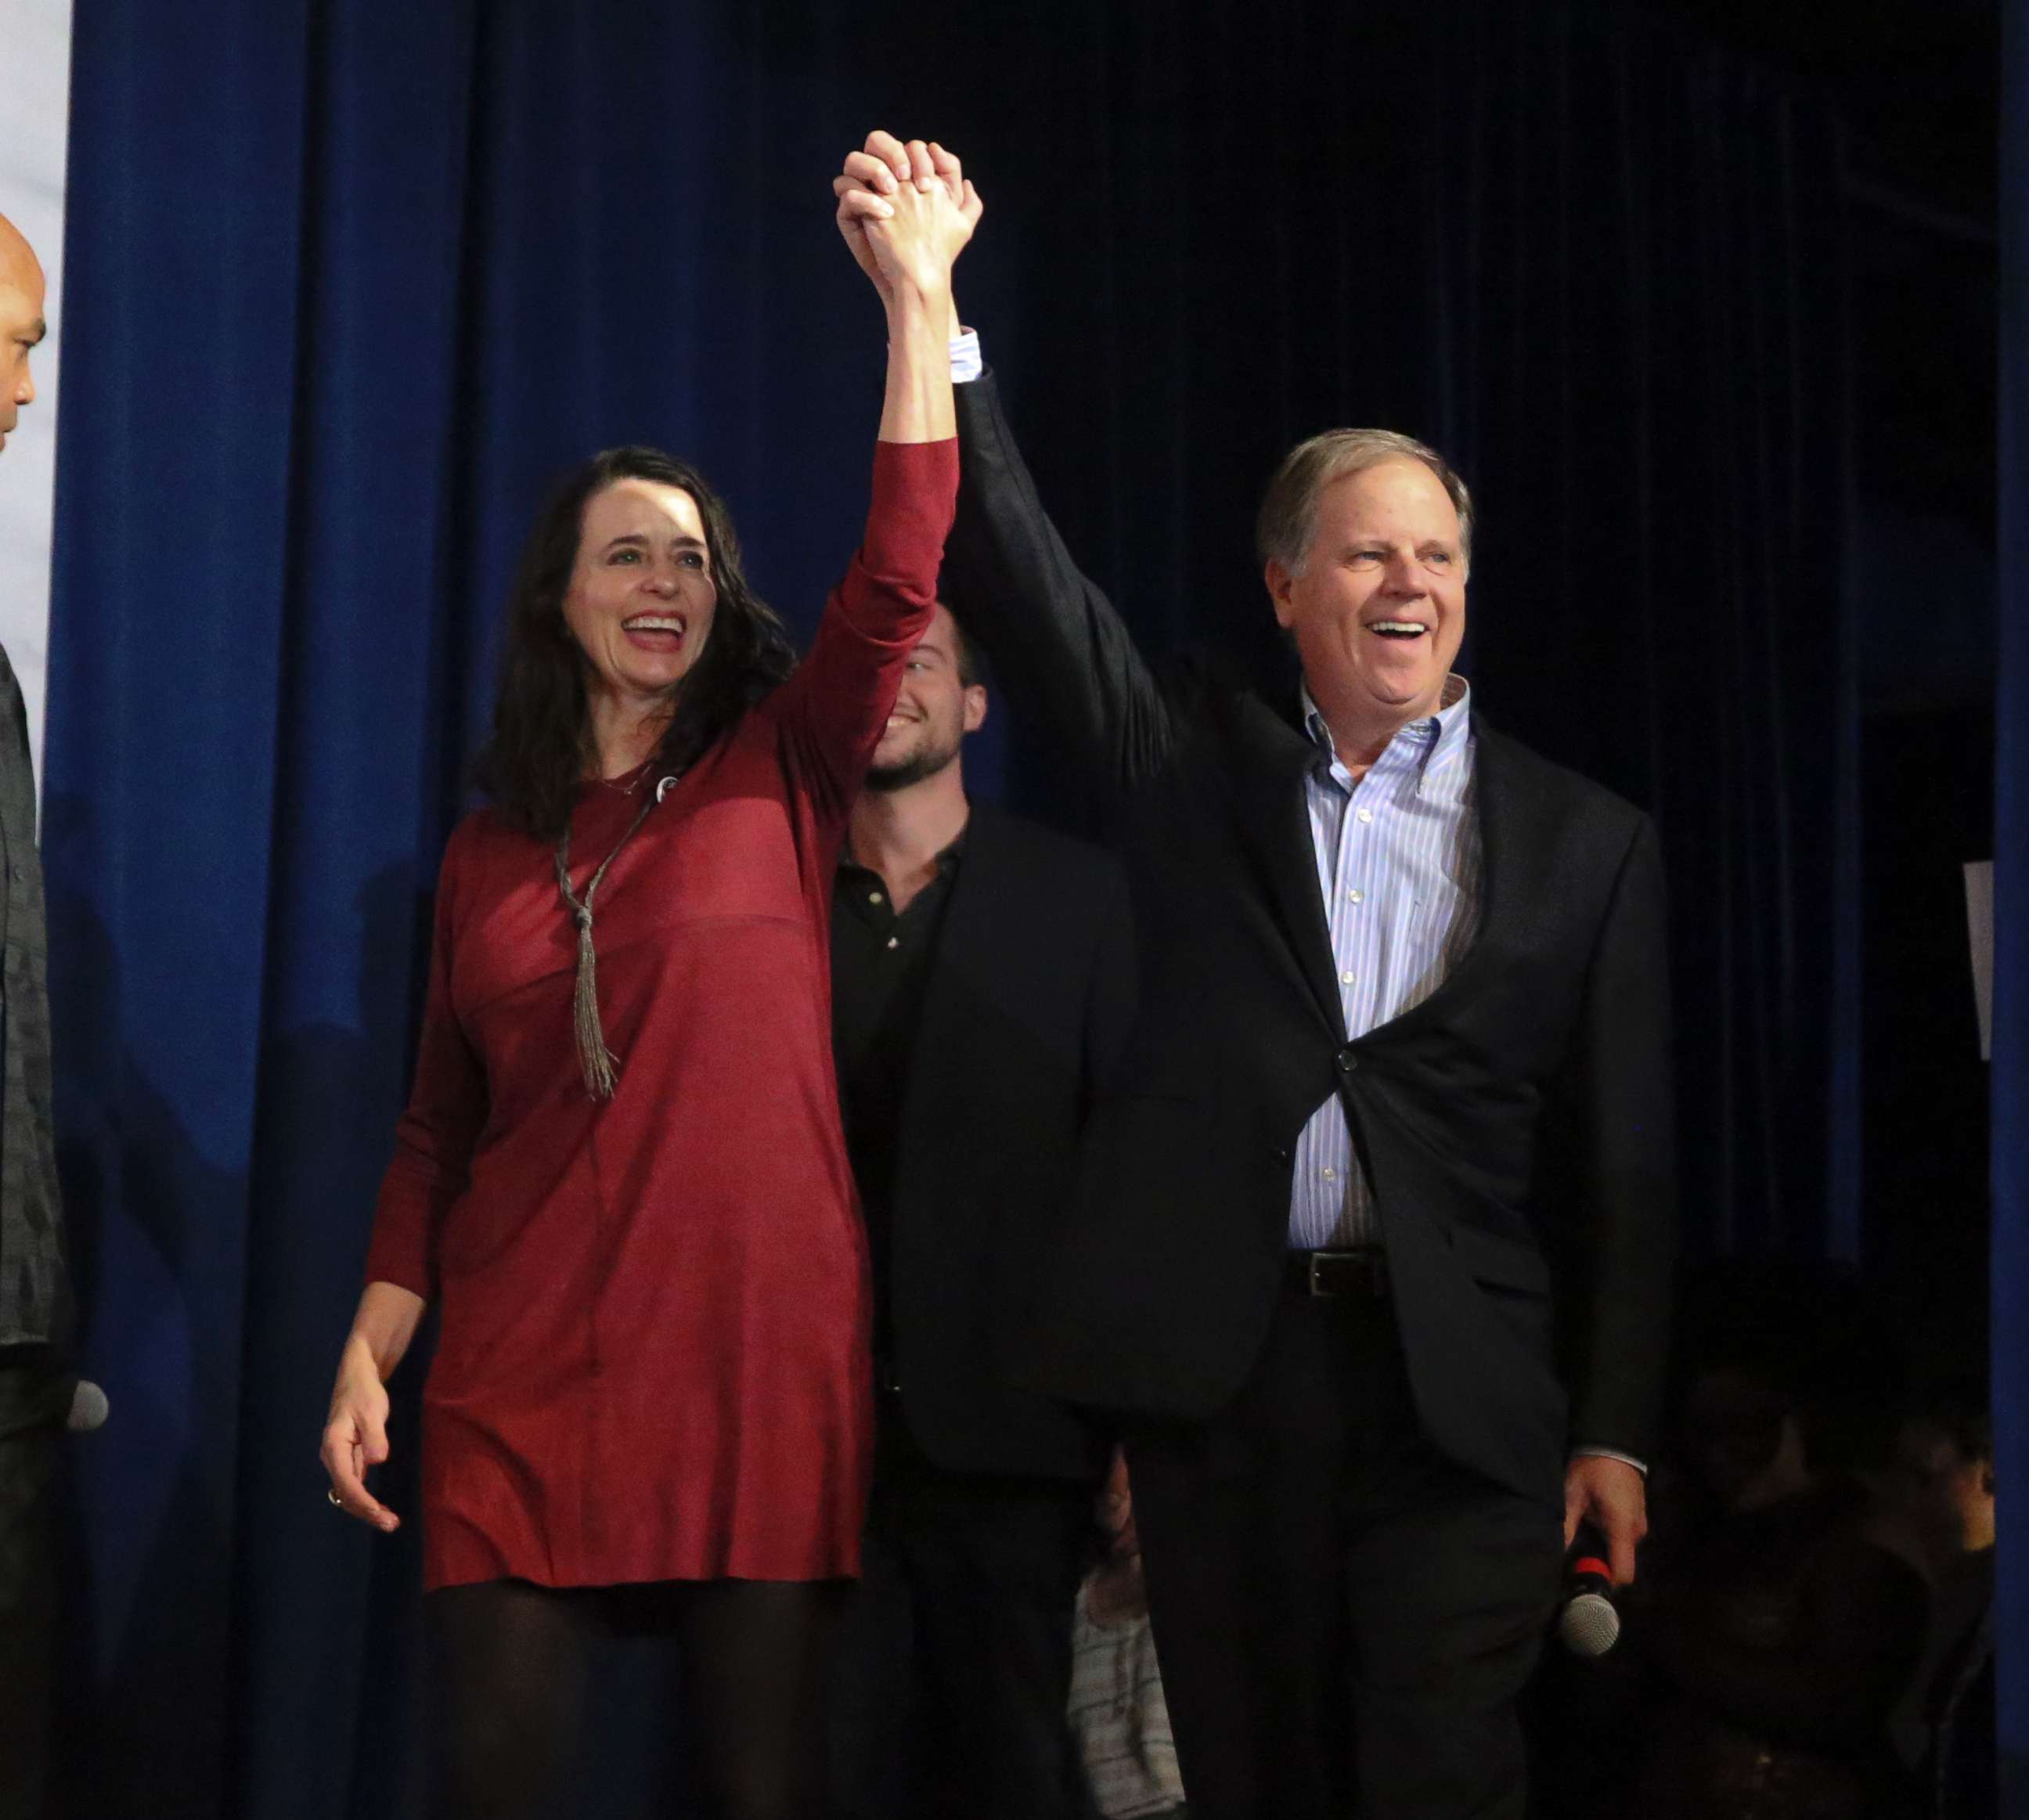 PHOTO: Democratic candidate for U.S. Senate Doug Jones and his wife Louise wave to supporters as they walk on stage during a rally Monday, Dec. 11, 2017, in Birmingham, Ala.